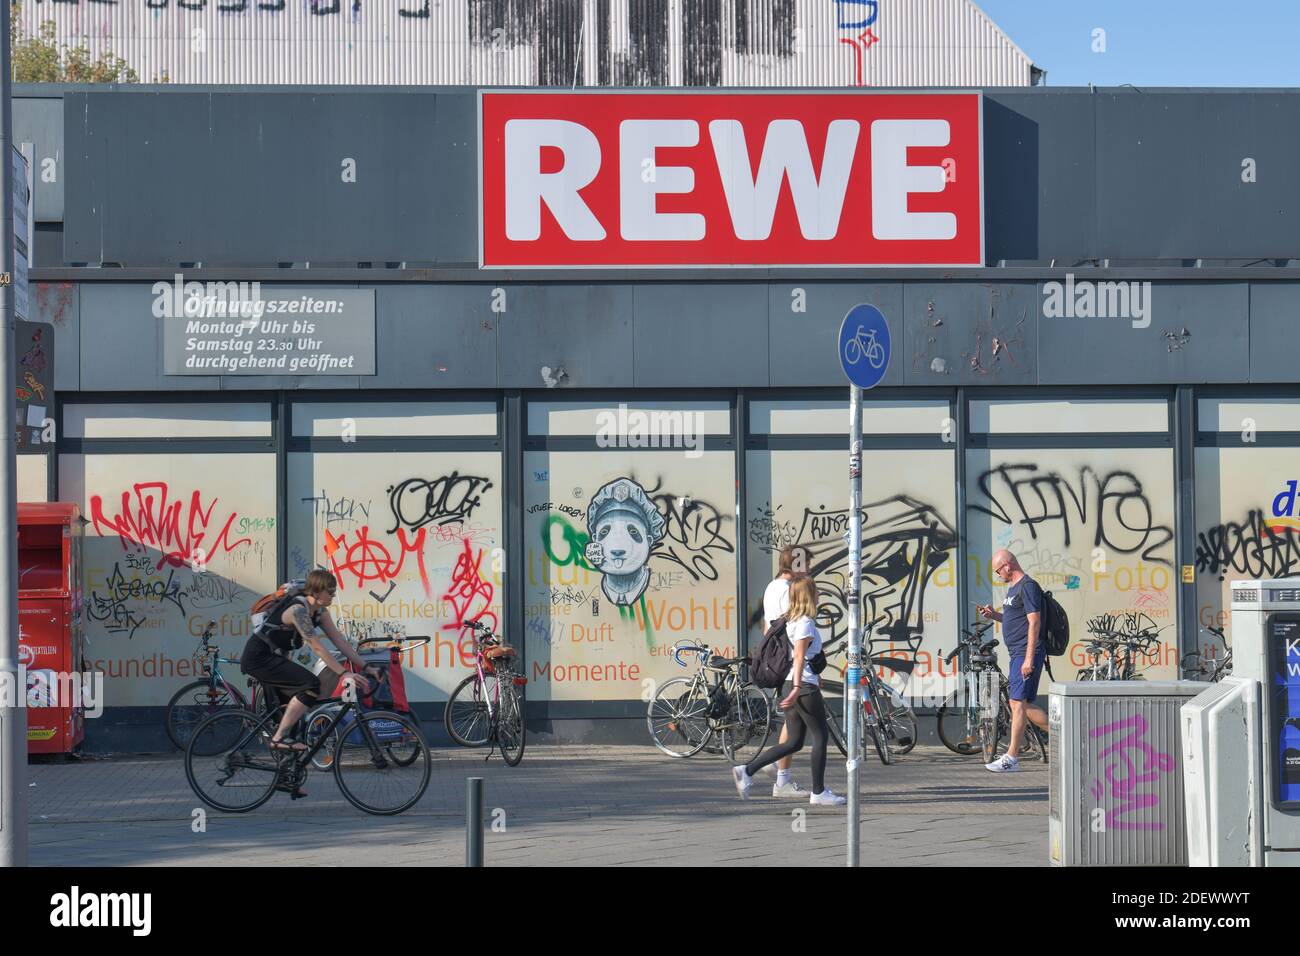 Rewe Markt High Resolution Stock Photography and Images - Alamy